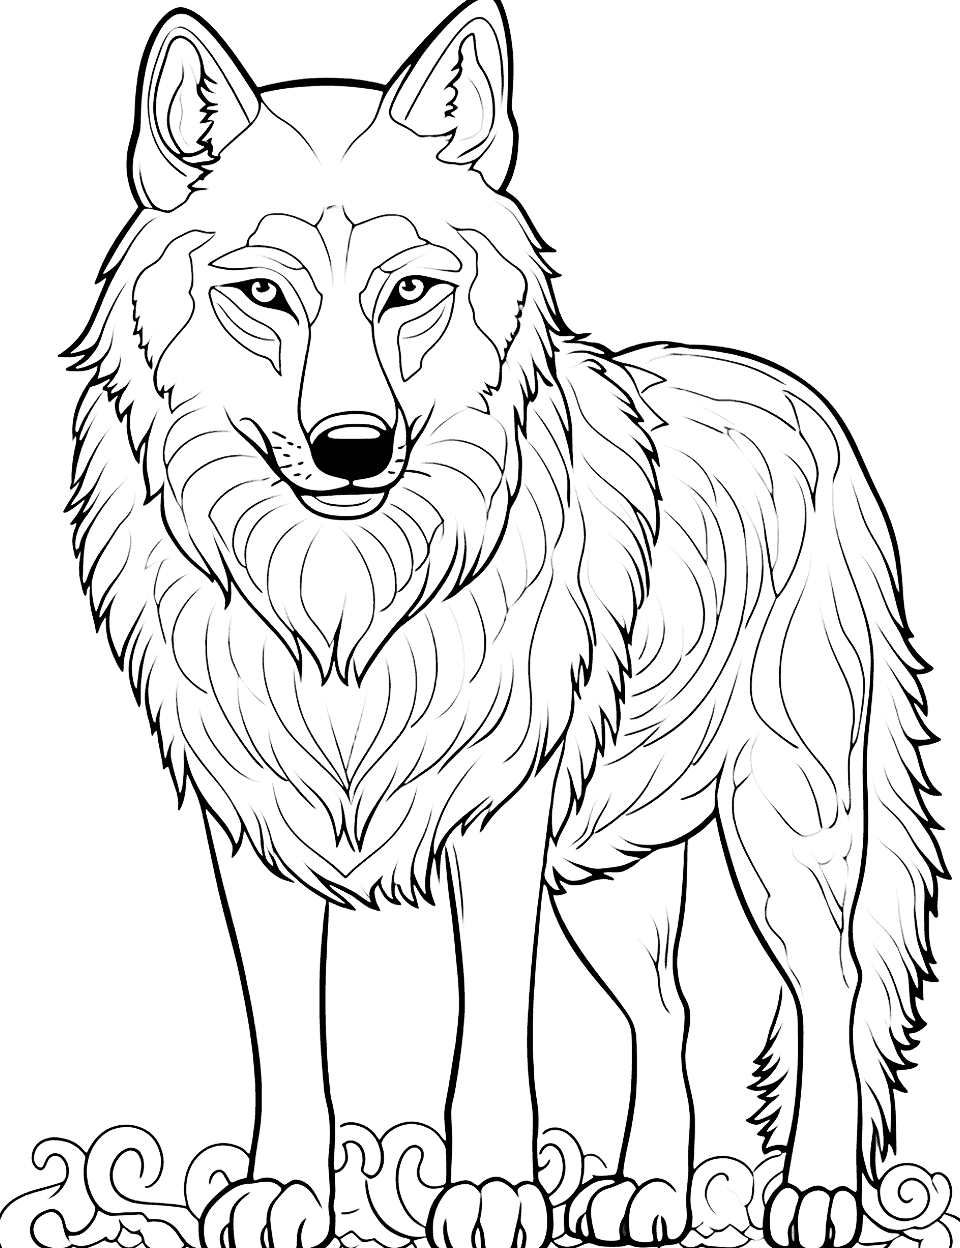 Art Nouveau Wolf Coloring Page - A wolf design inspired by Art Nouveau, with flowing lines and floral motifs.